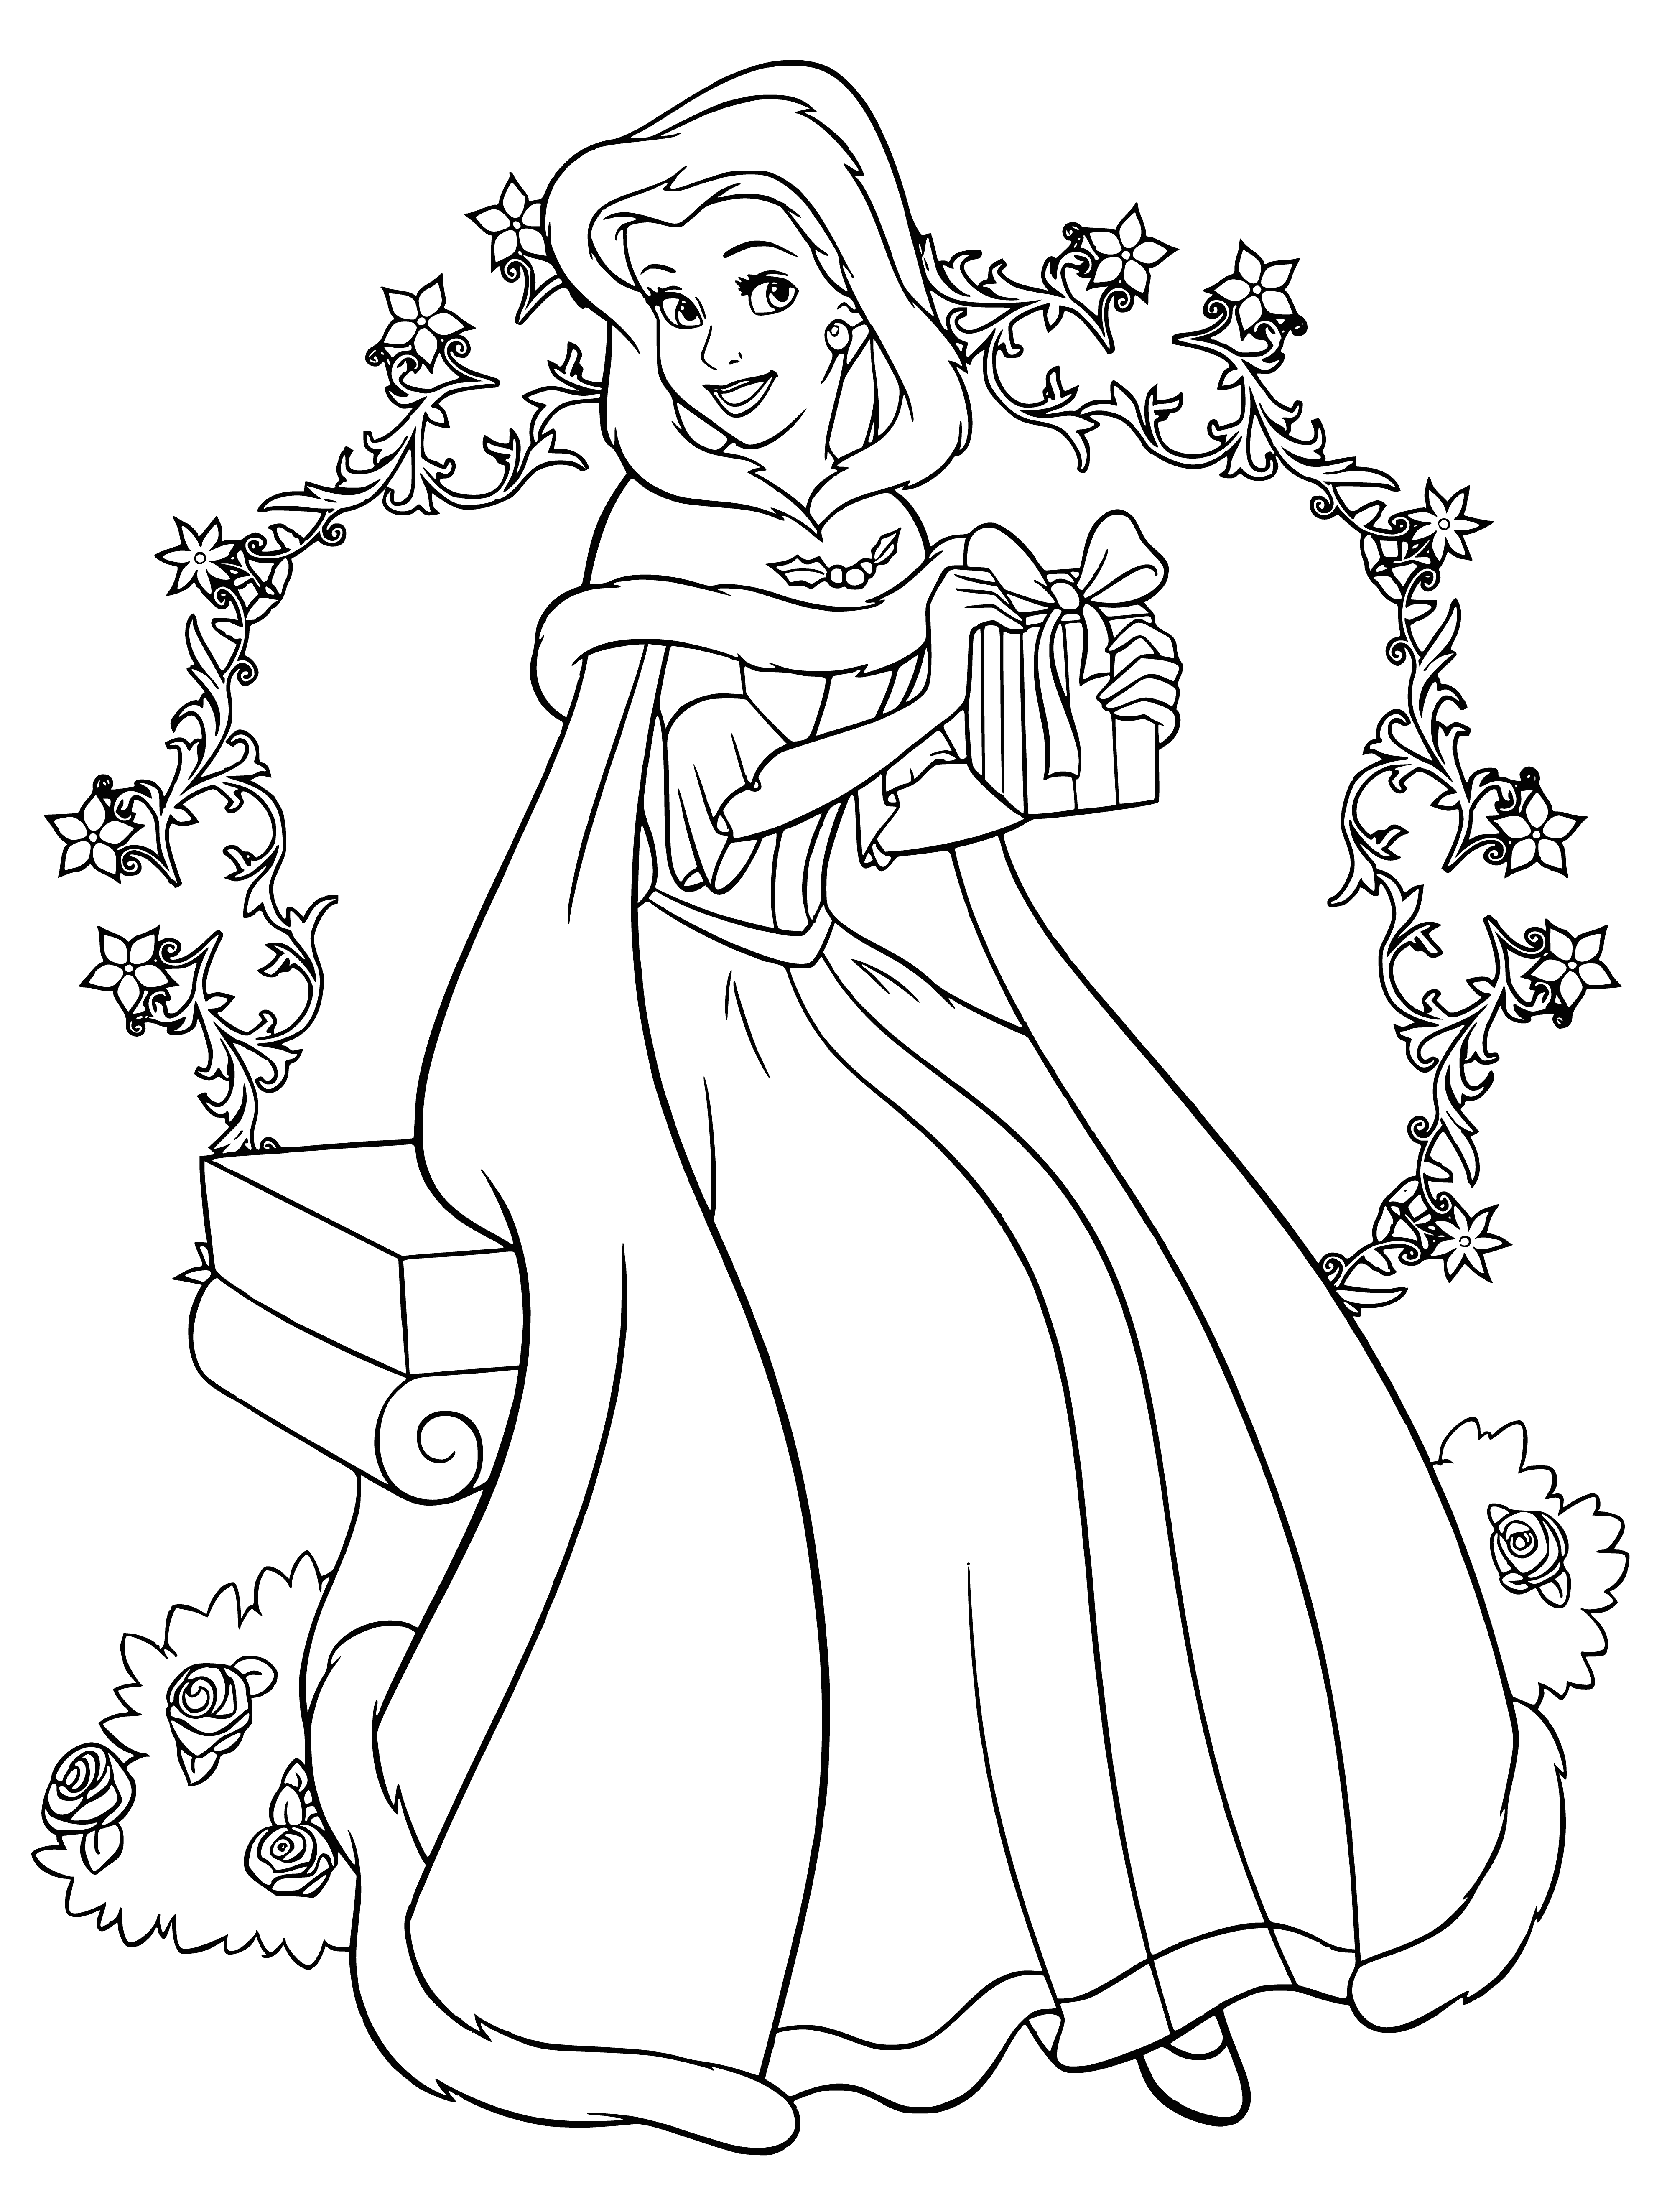 coloring page: Belle stands with Disney princesses in winter coats, sparkling & holding hands, smiling at camera.